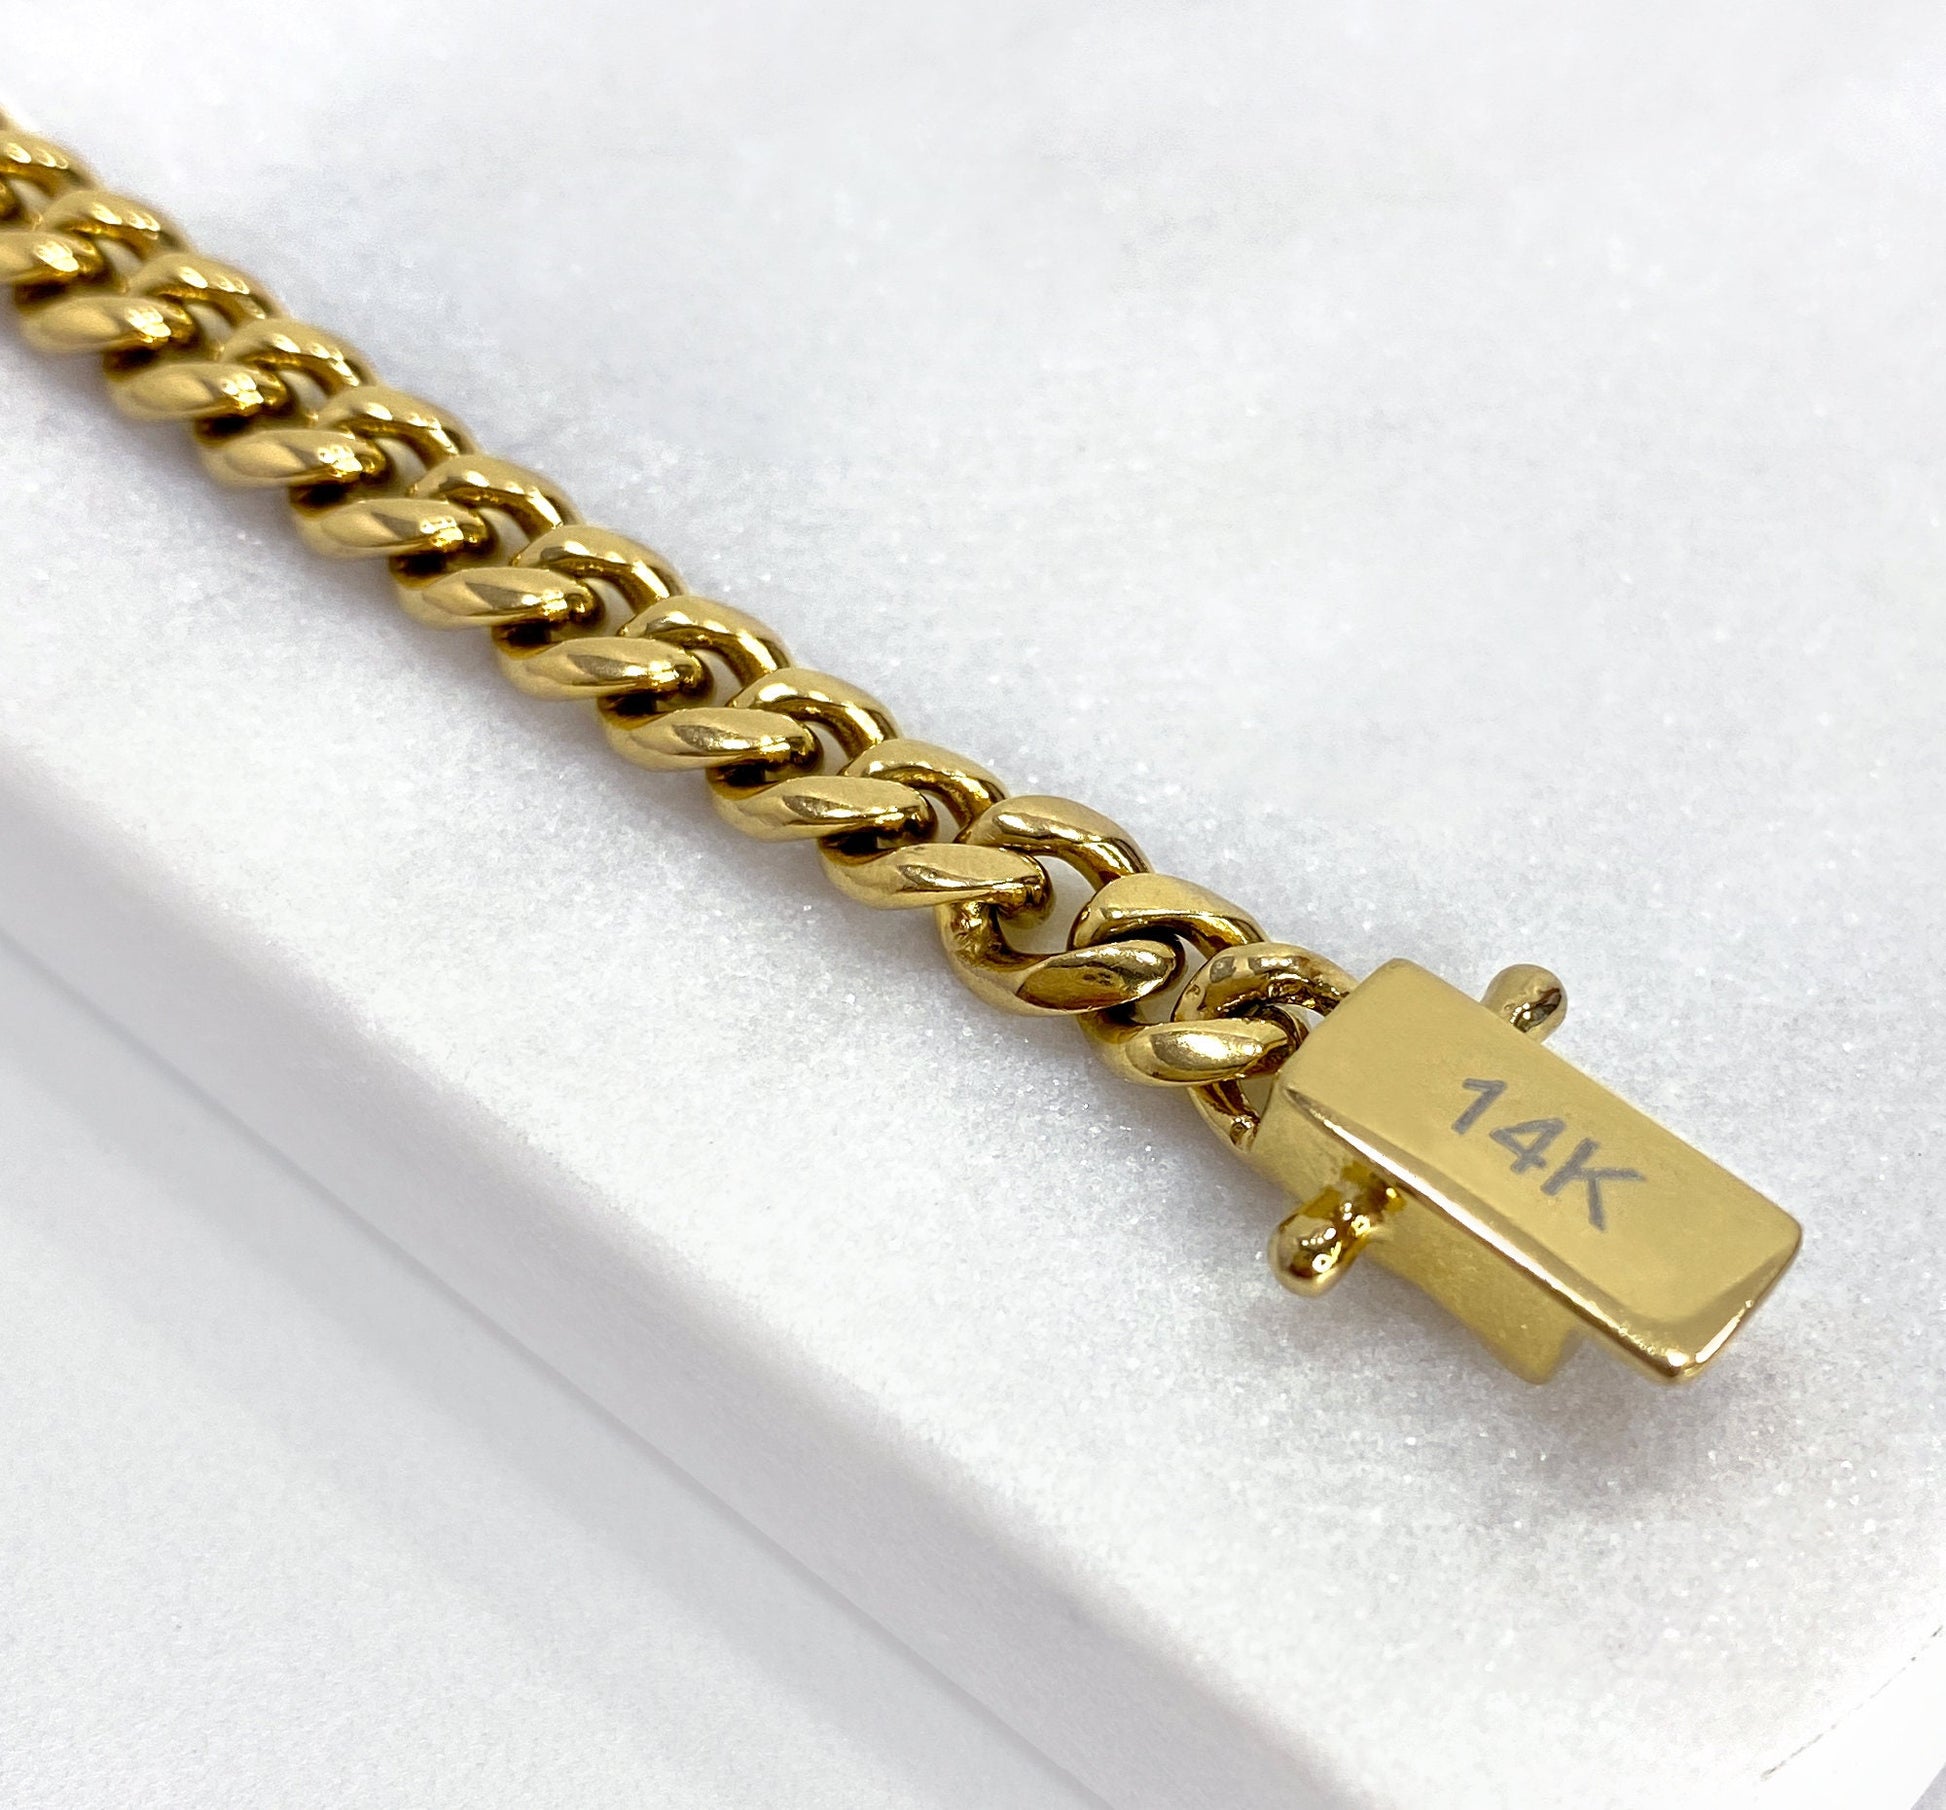 14k Gold Filled Miami Cuban Link Chain 6mm Thickness Featuring Double Safety Lock Box Clasp, Unisex Curb Link, Wholesale Jewelry Supplies